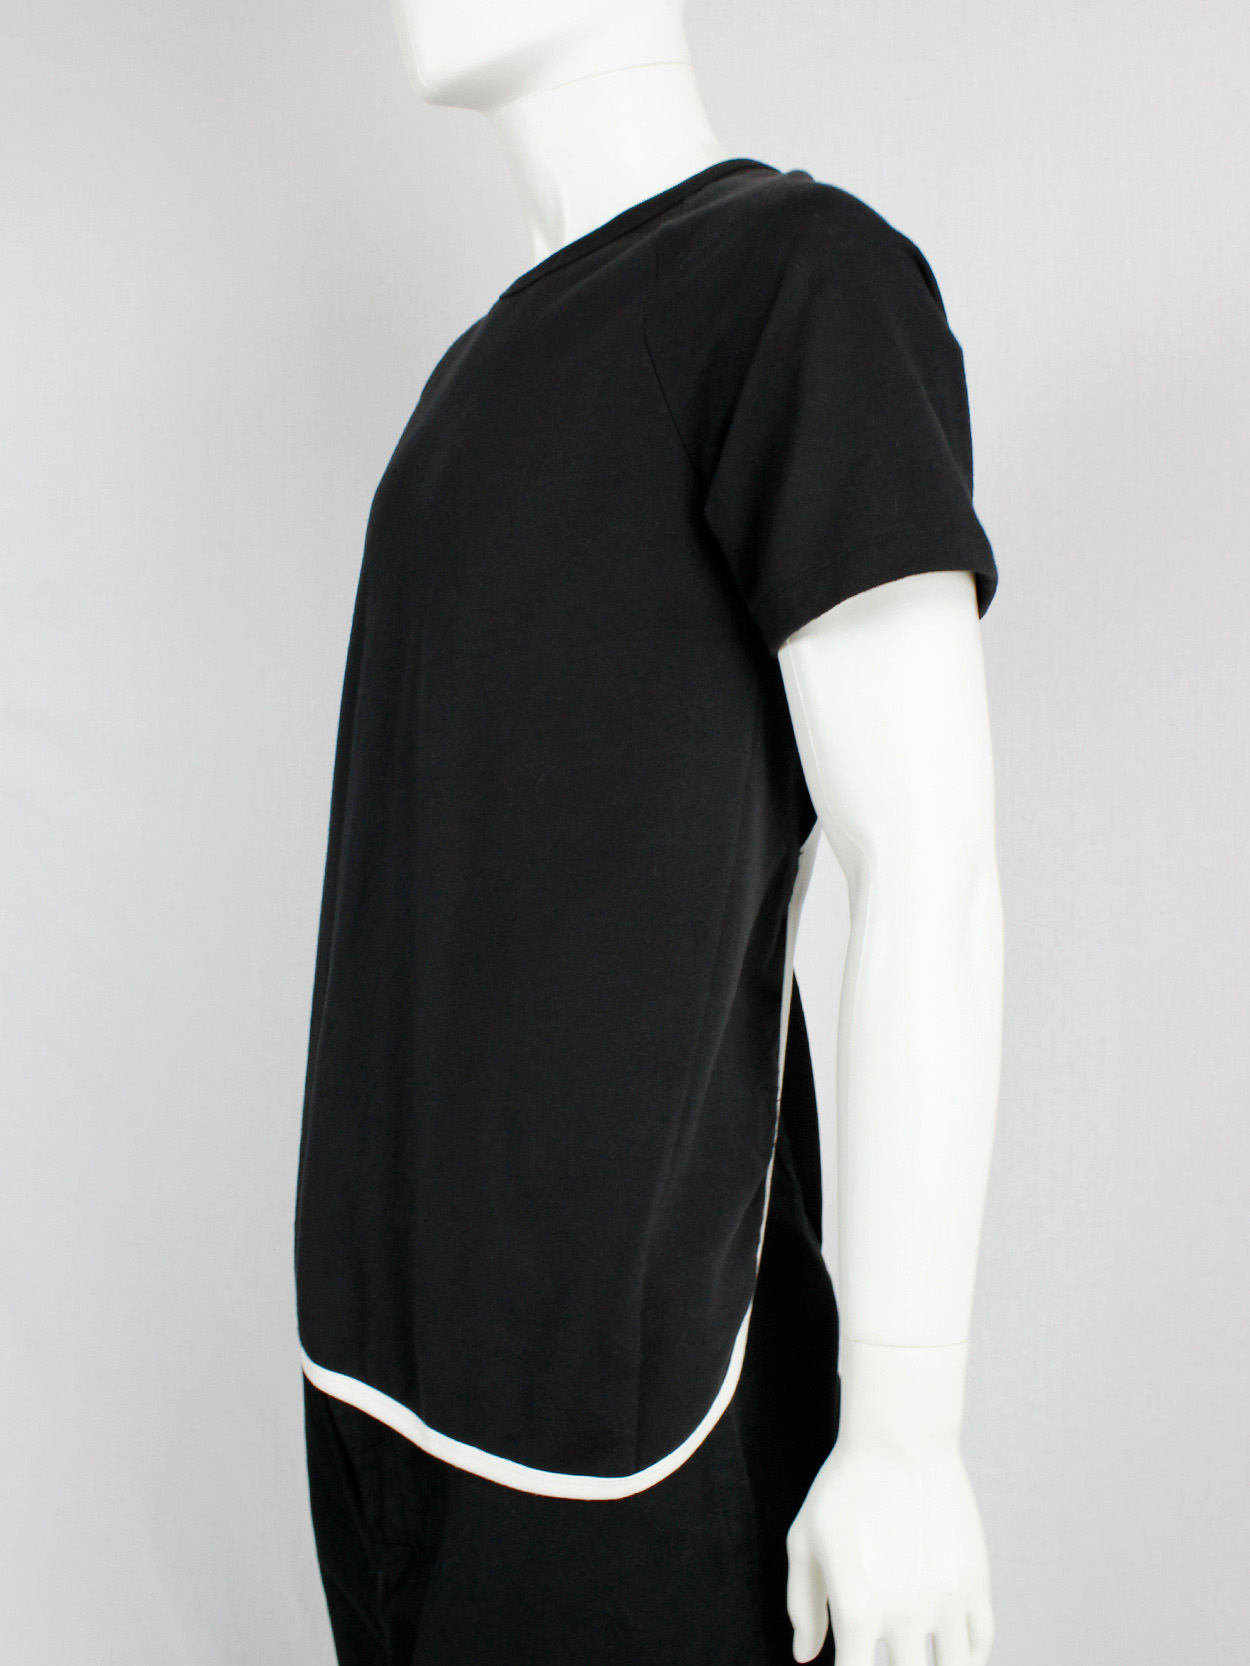 Dries Van Noten black t-shirt with white trim and open belted back (4)